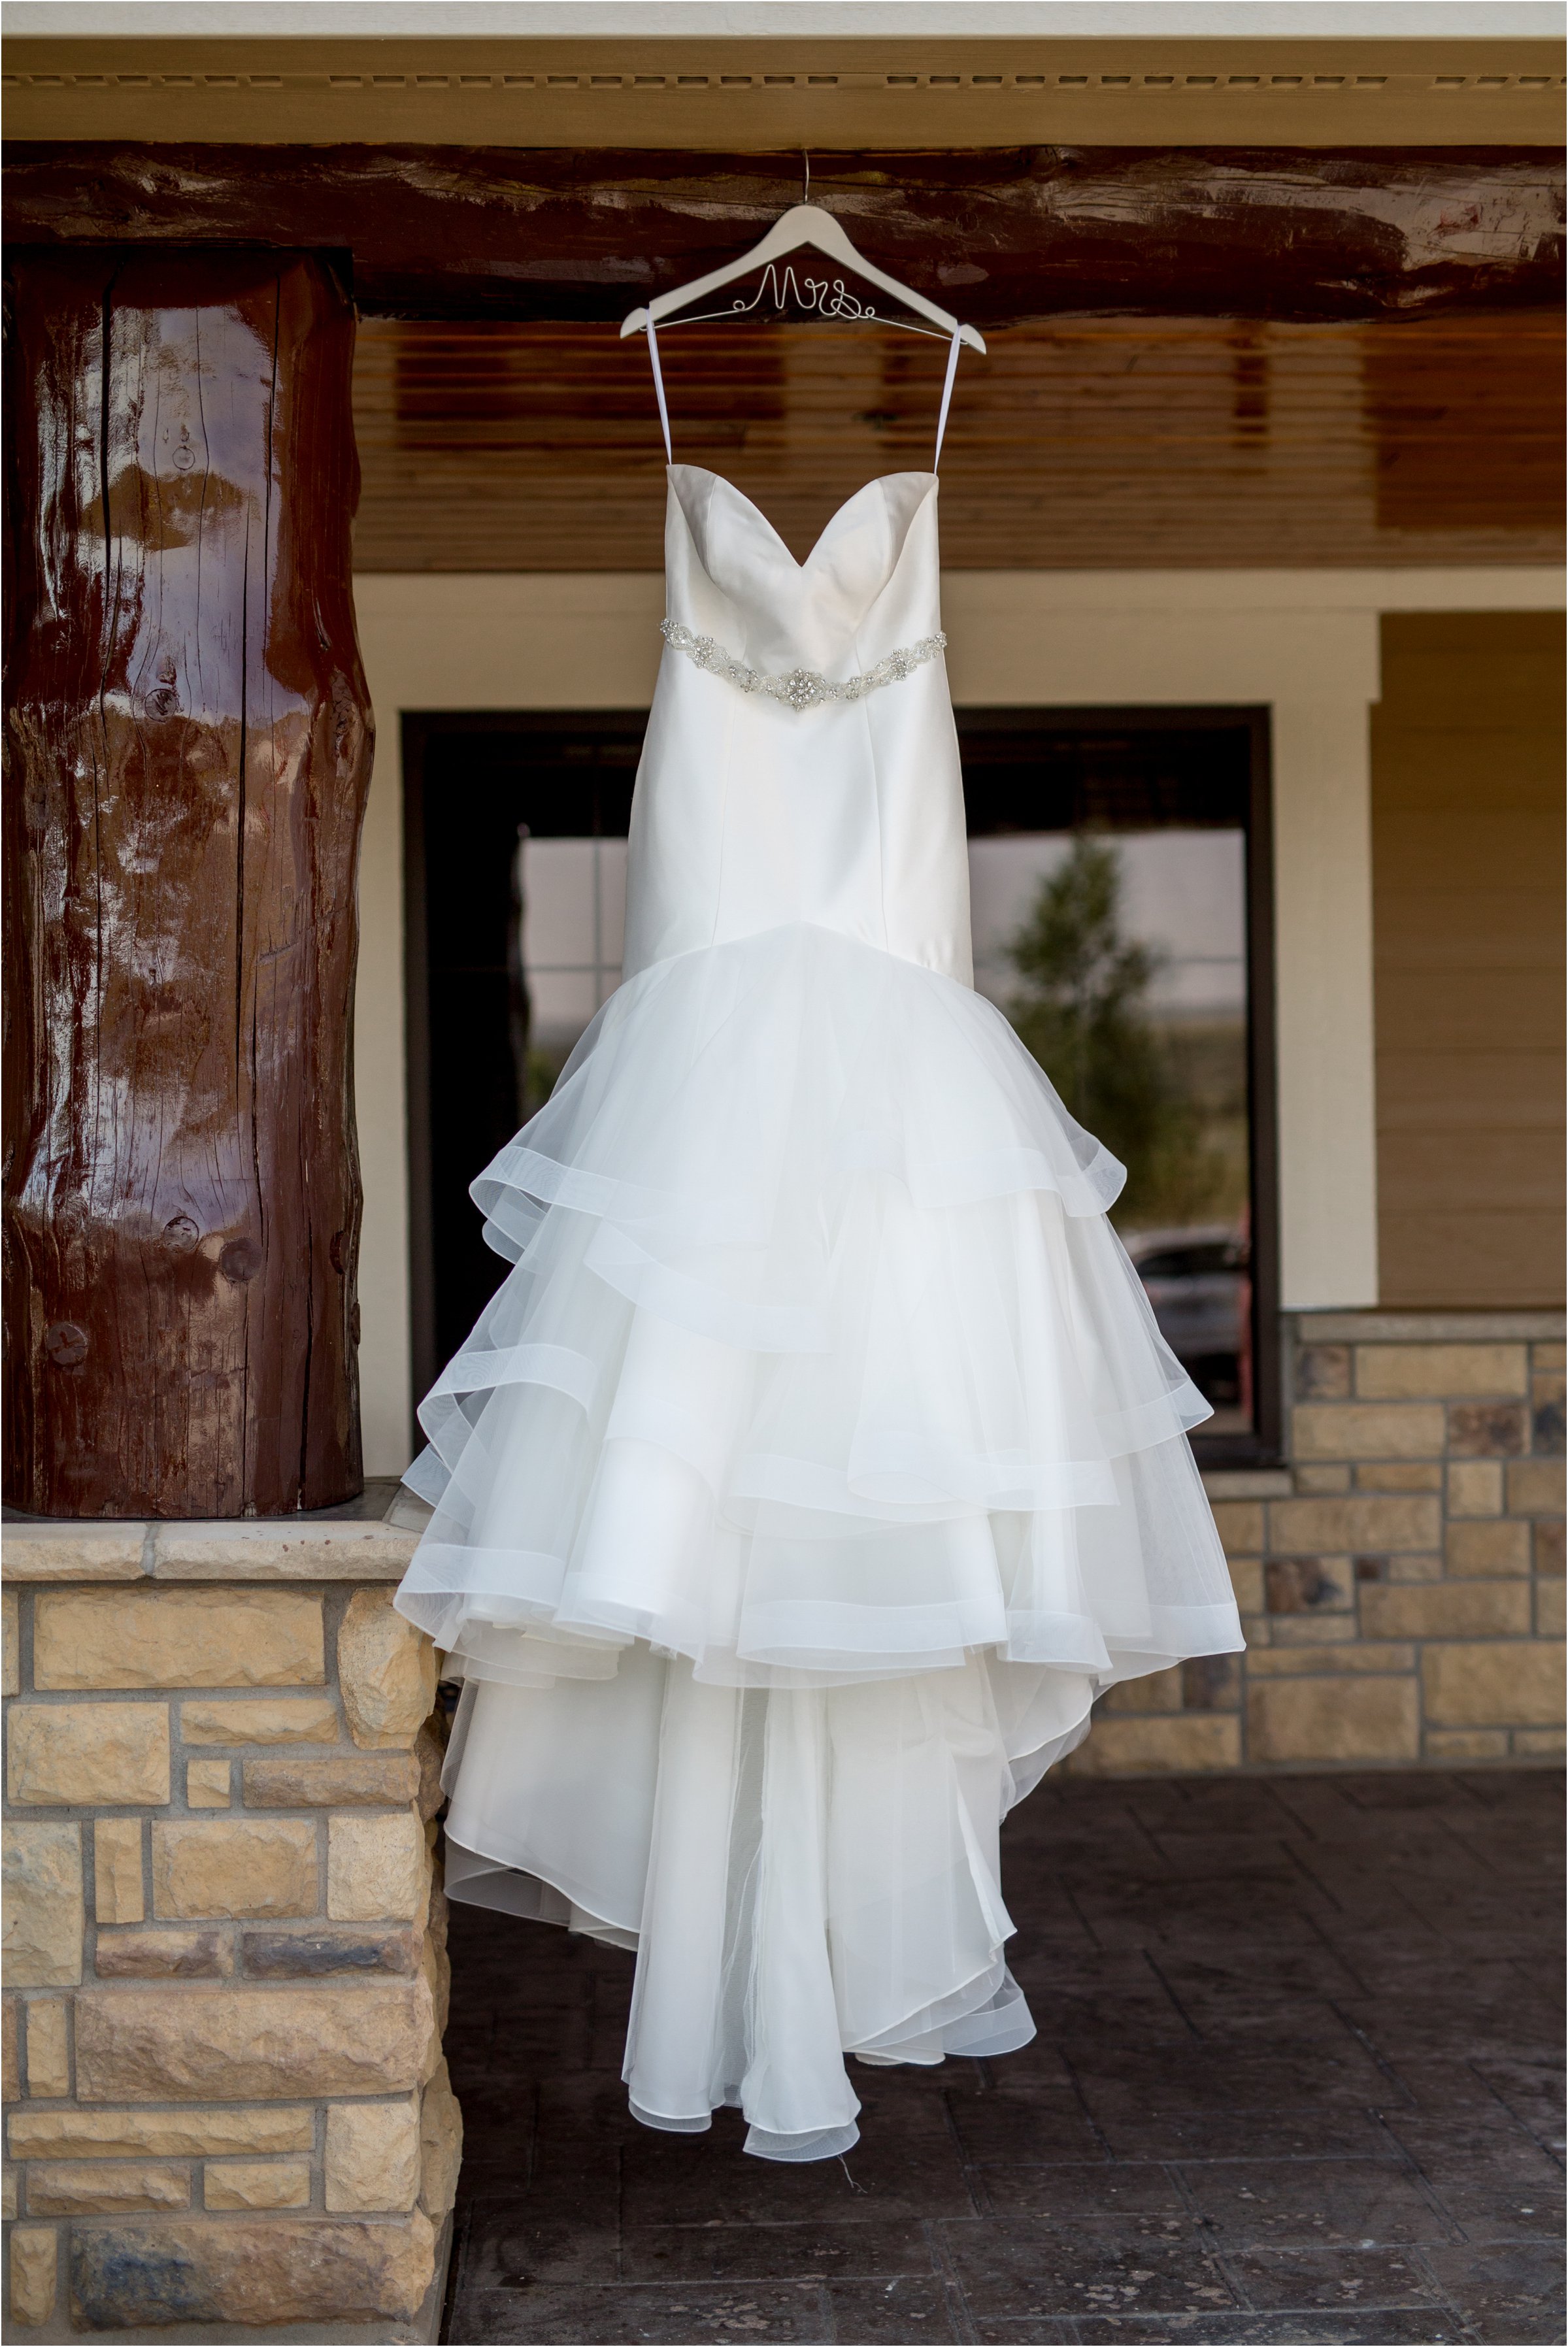 bride's wedding dress hanging on a rustic looking log outside a laramie hotel